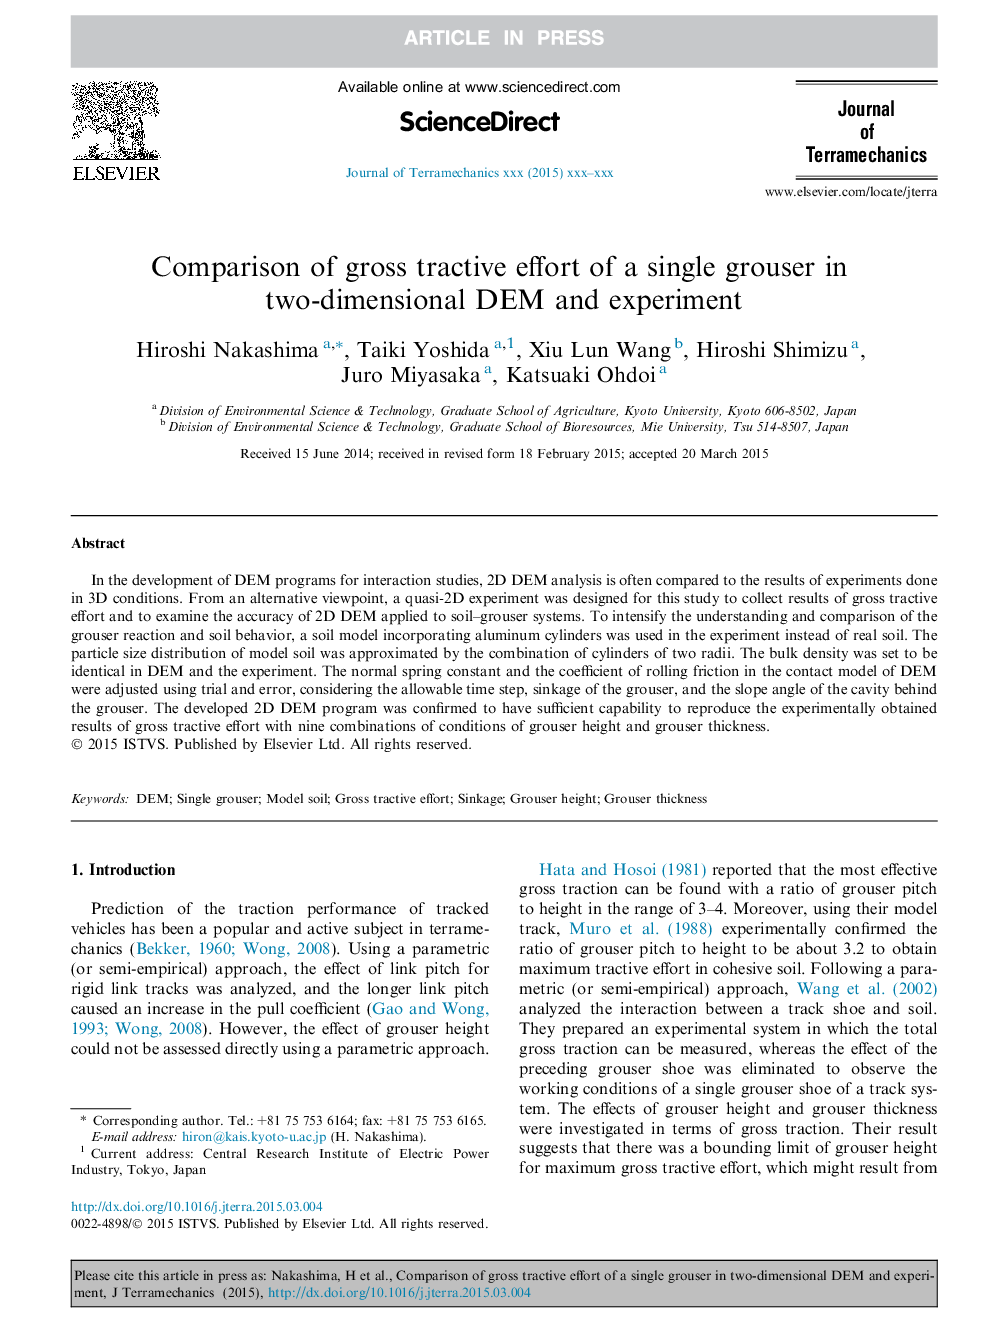 Comparison of gross tractive effort of a single grouser in two-dimensional DEM and experiment